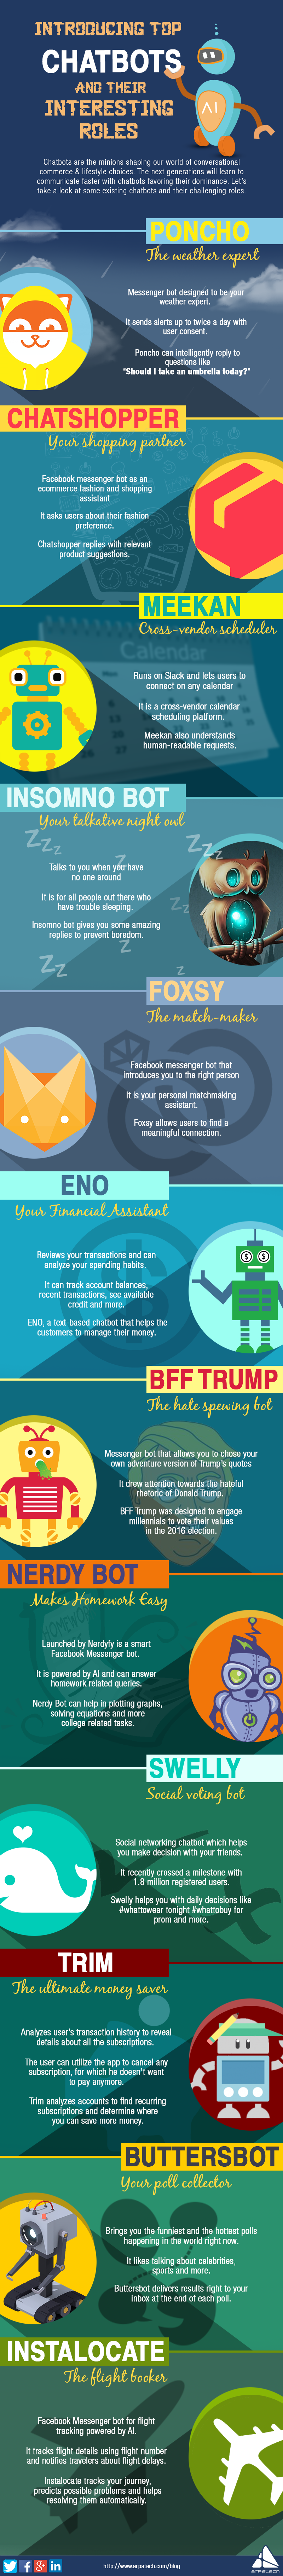 top-chatbots-and-their-interesting-roles